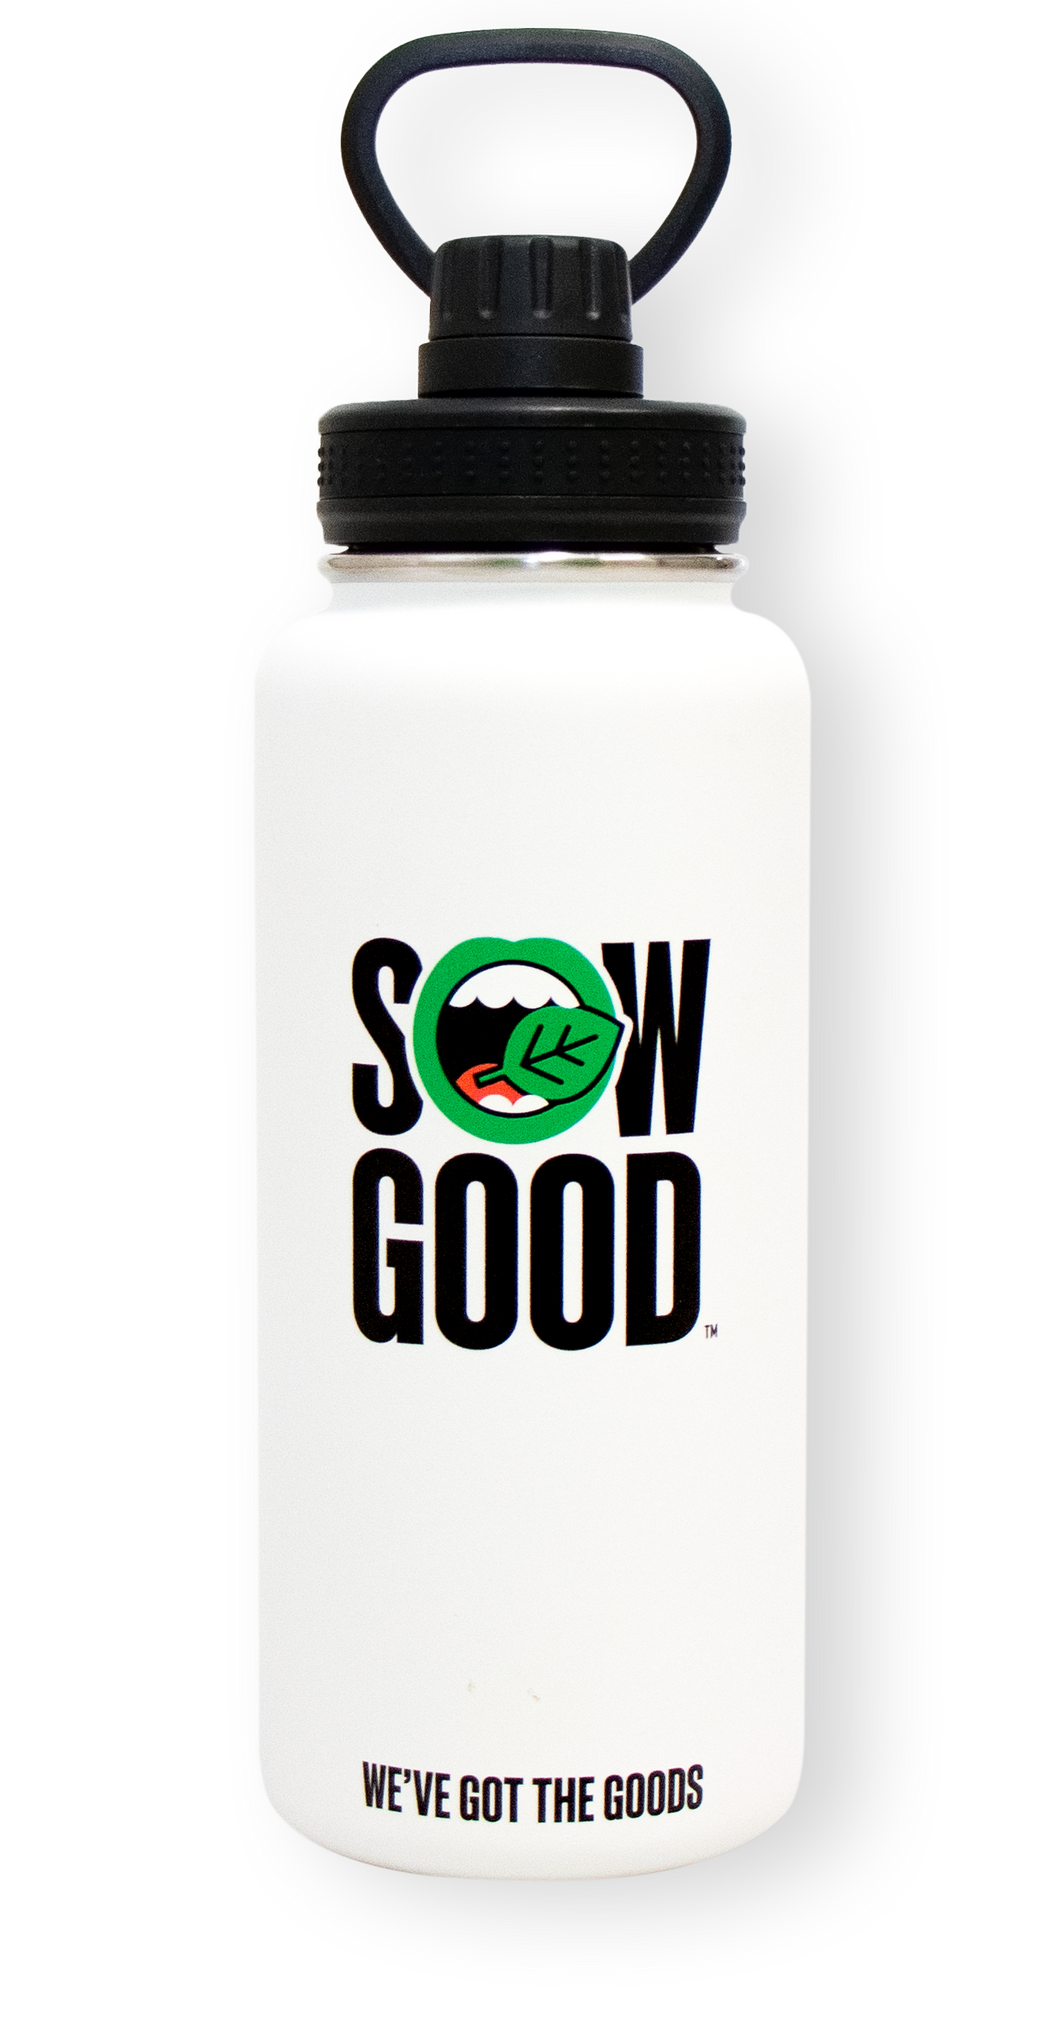 Sow Good 32oz Drinking Flask with Handle